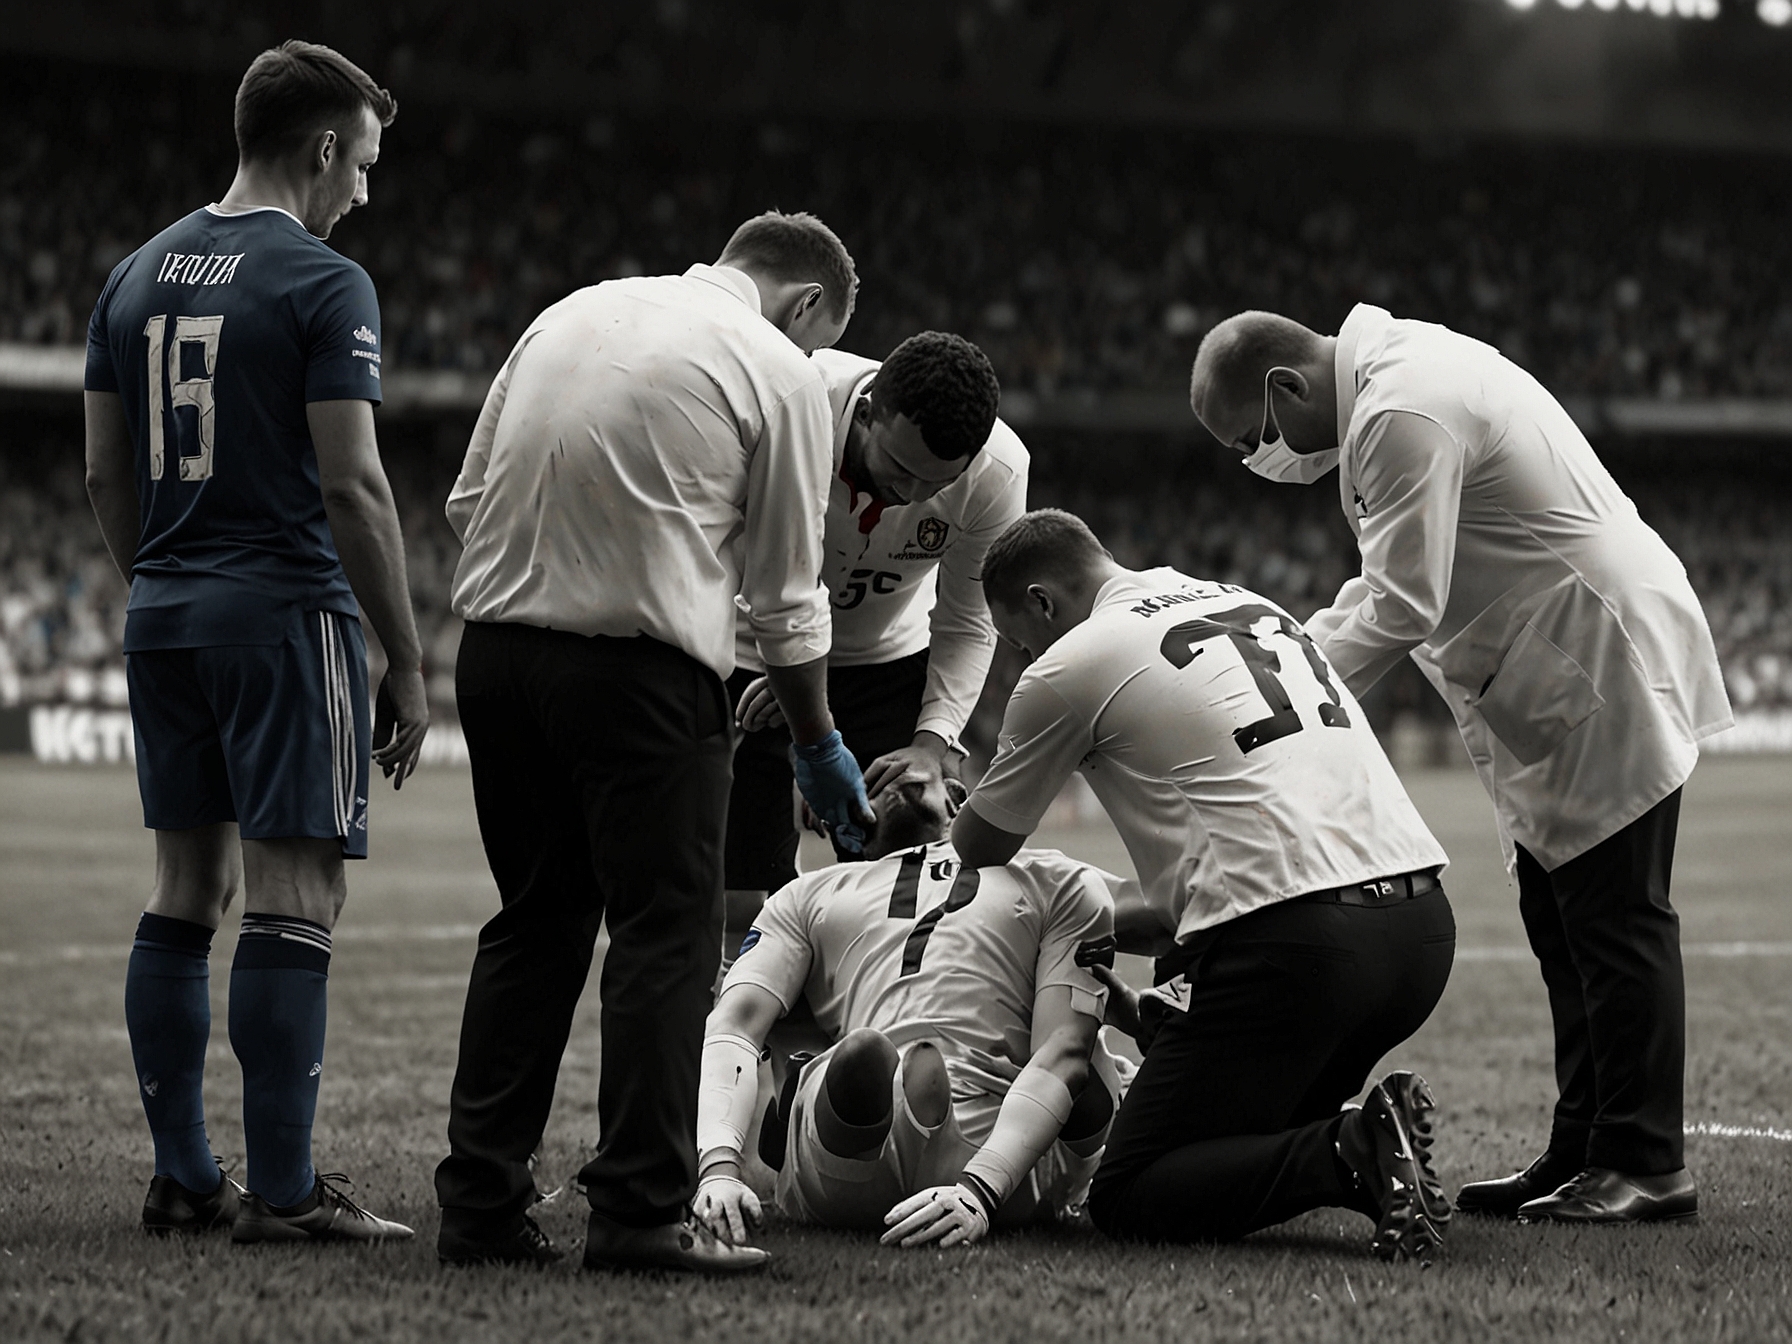 Players gather around as medical personnel attend to Barnabas Varga on the field after a severe head collision during the Euro 2024 qualifier against Scotland. The tension is palpable.